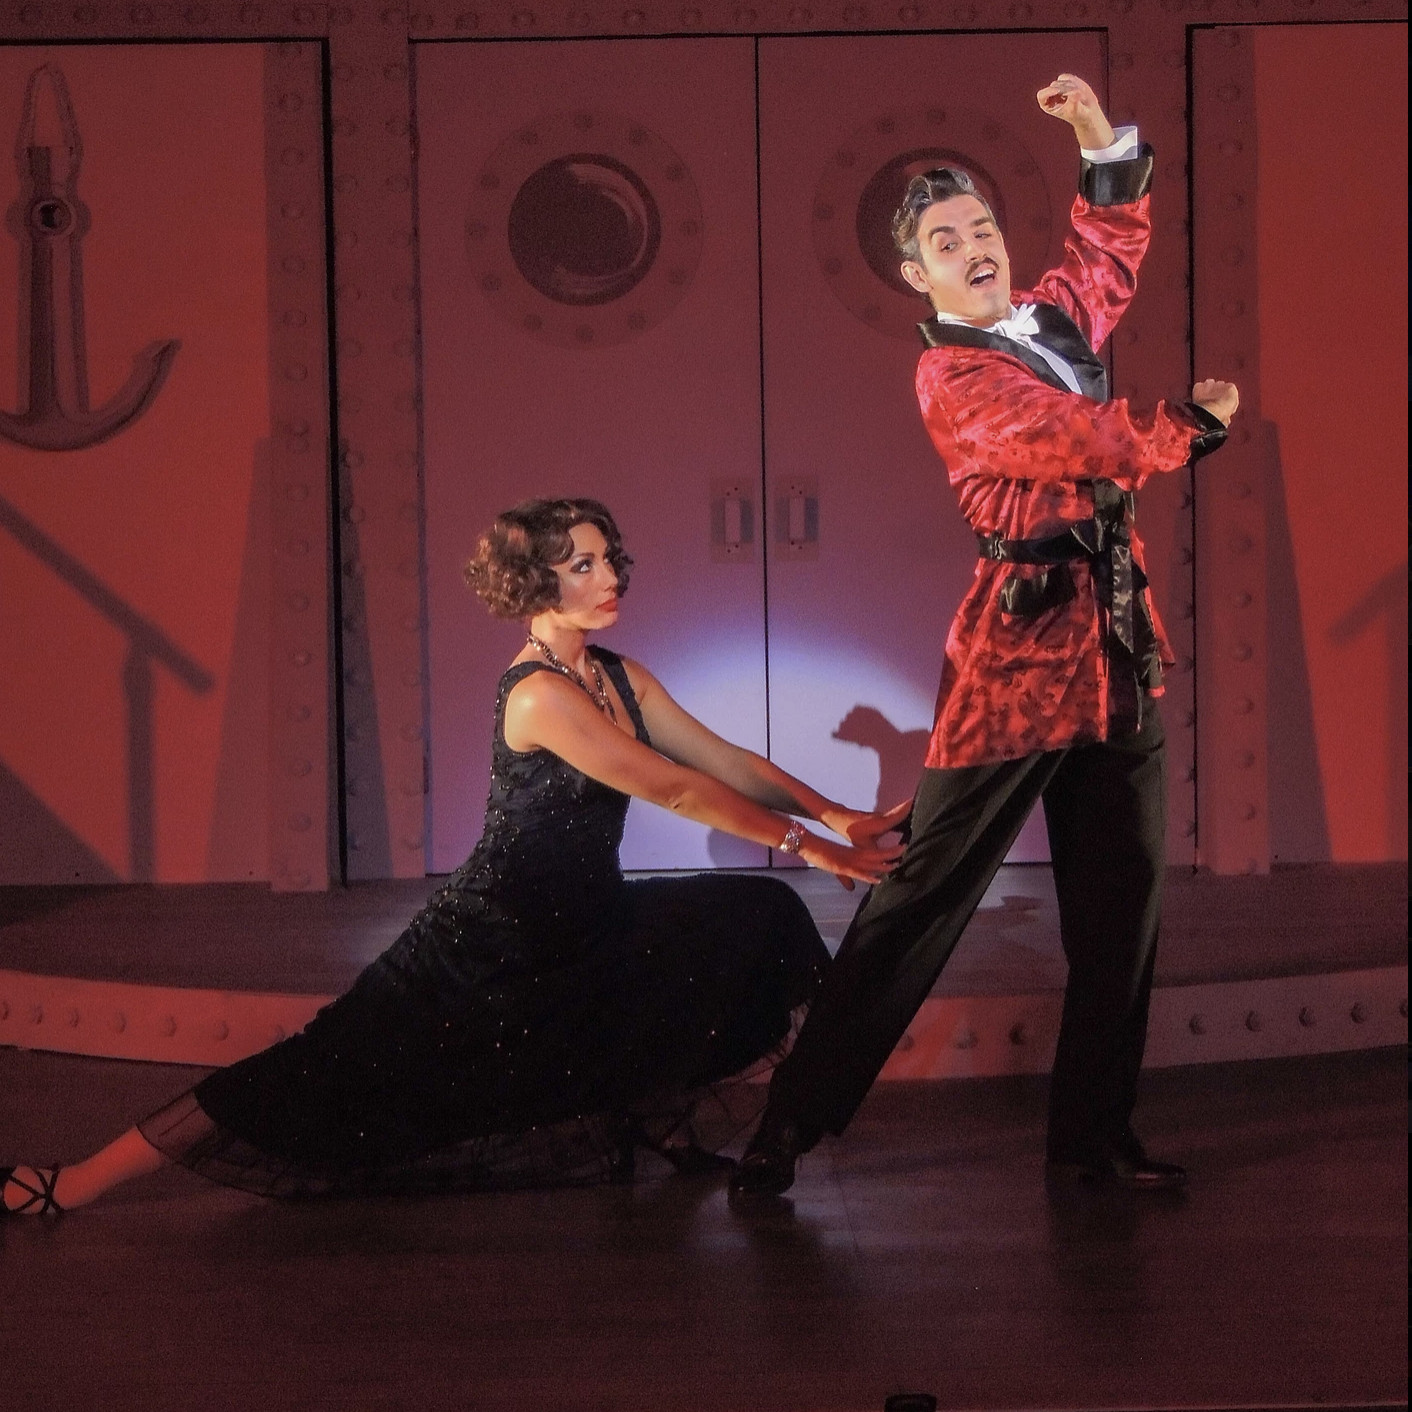 Woman in black dress dancing with suave man in red robe- they dancing tango